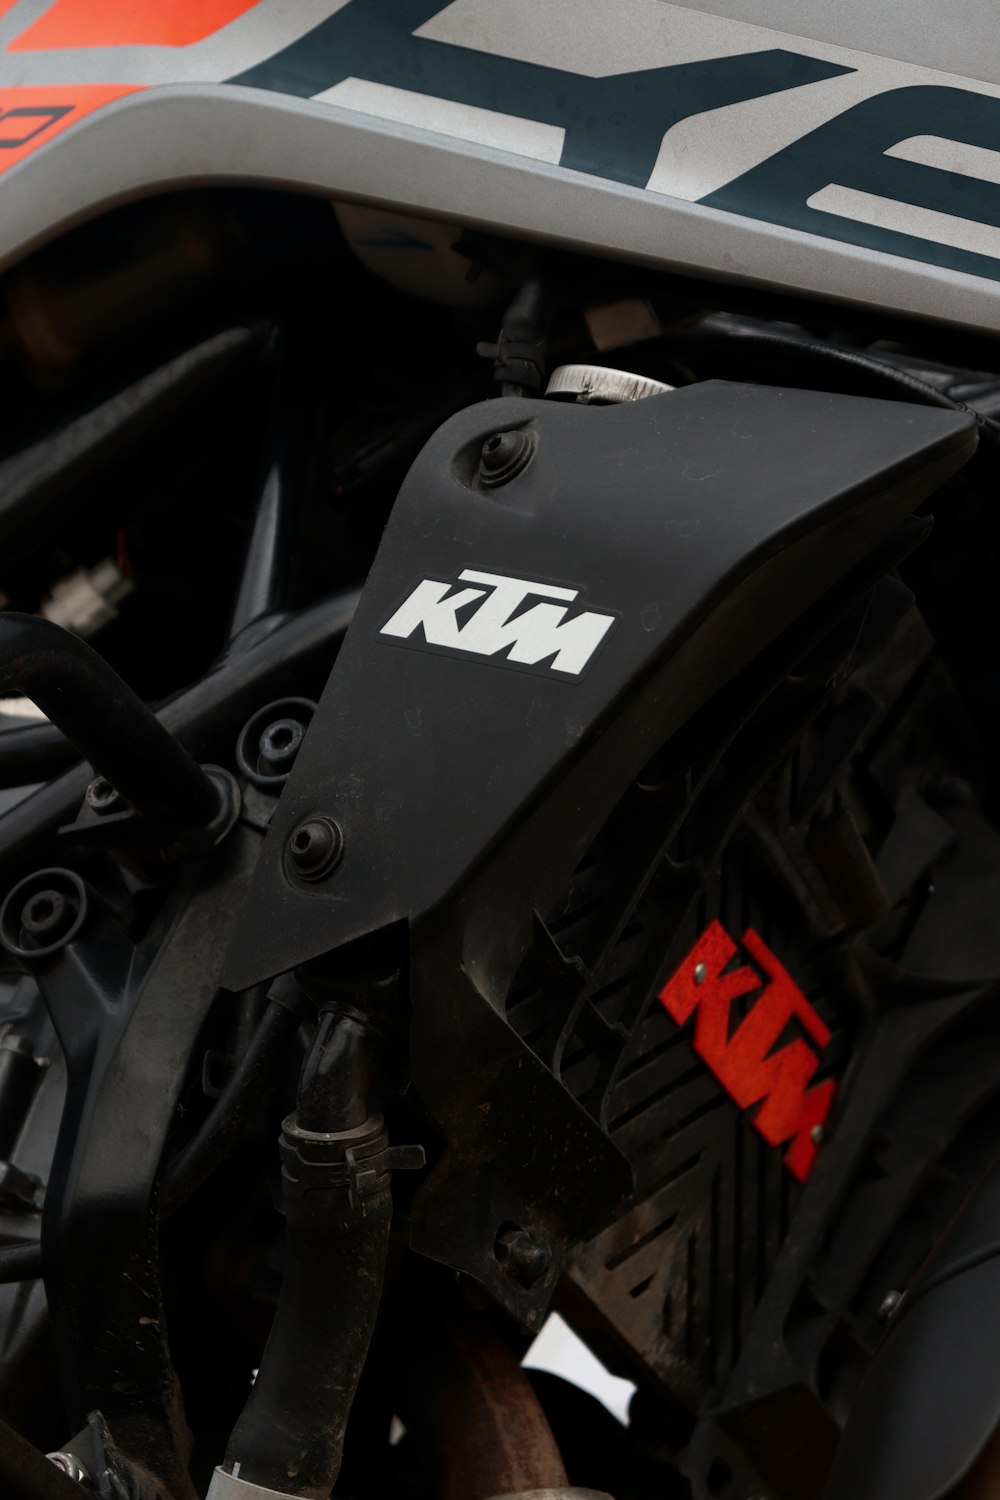 a close up of the front of a motorcycle